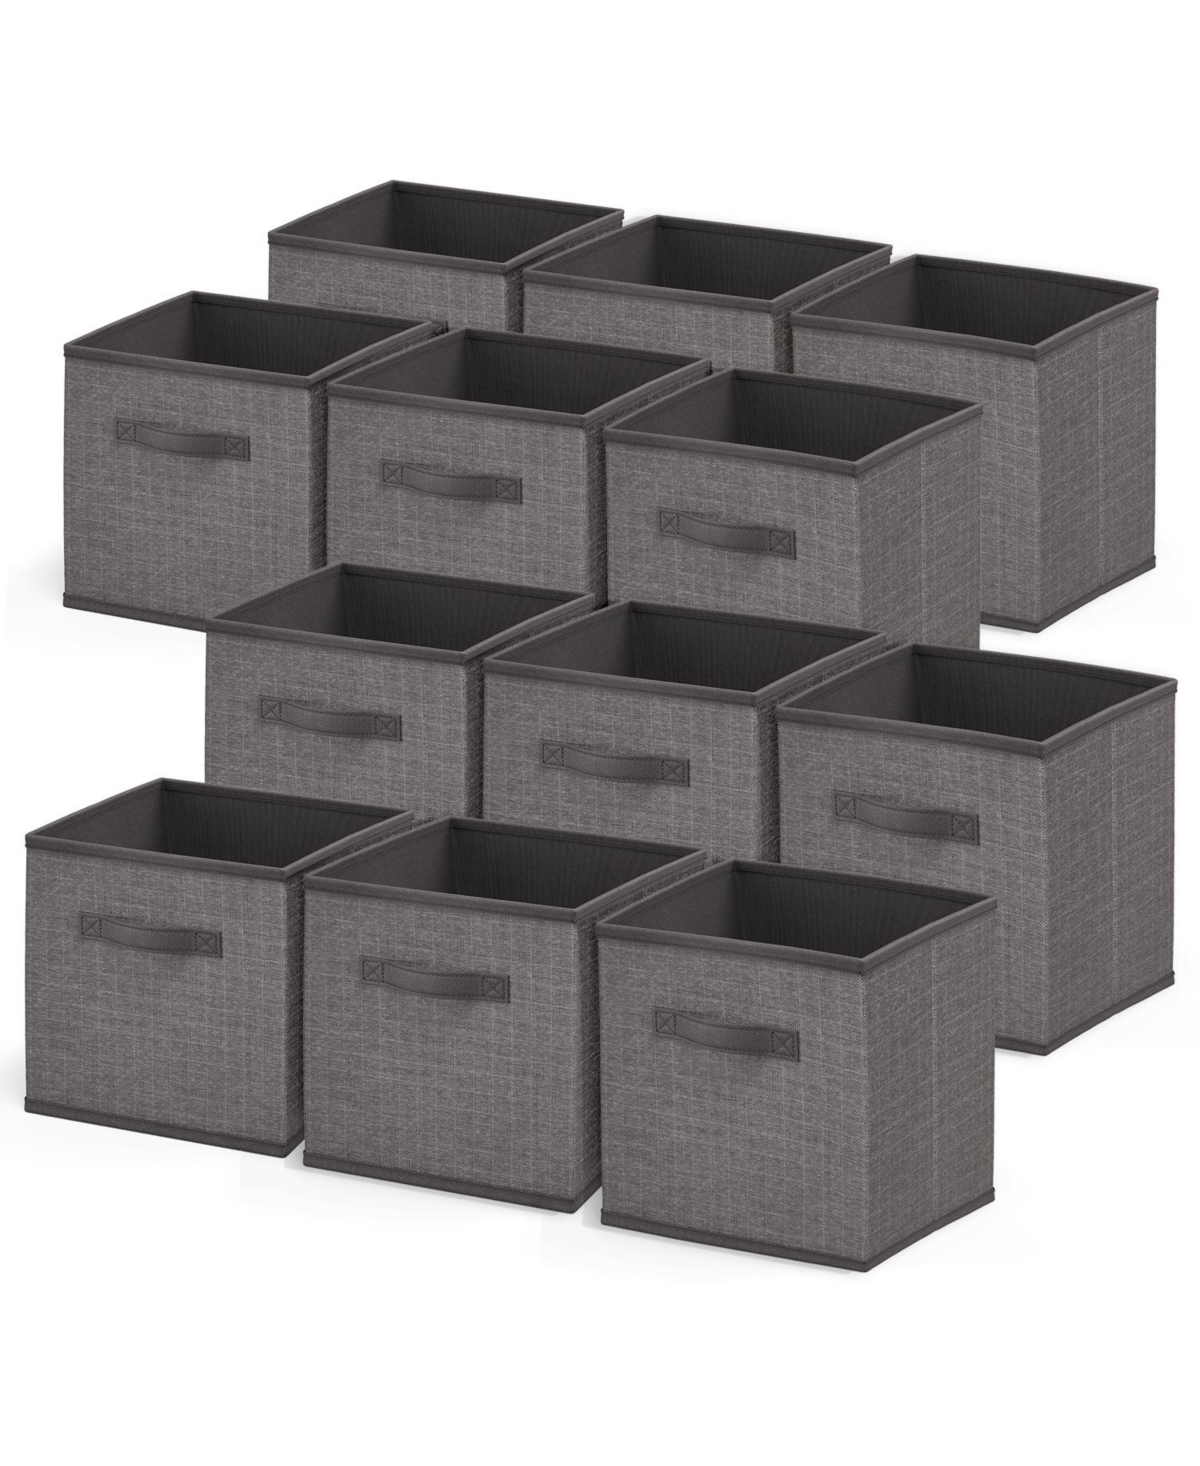 Foldable Fabric Cube Storage Bins with Handles - 12 Pack - Grey